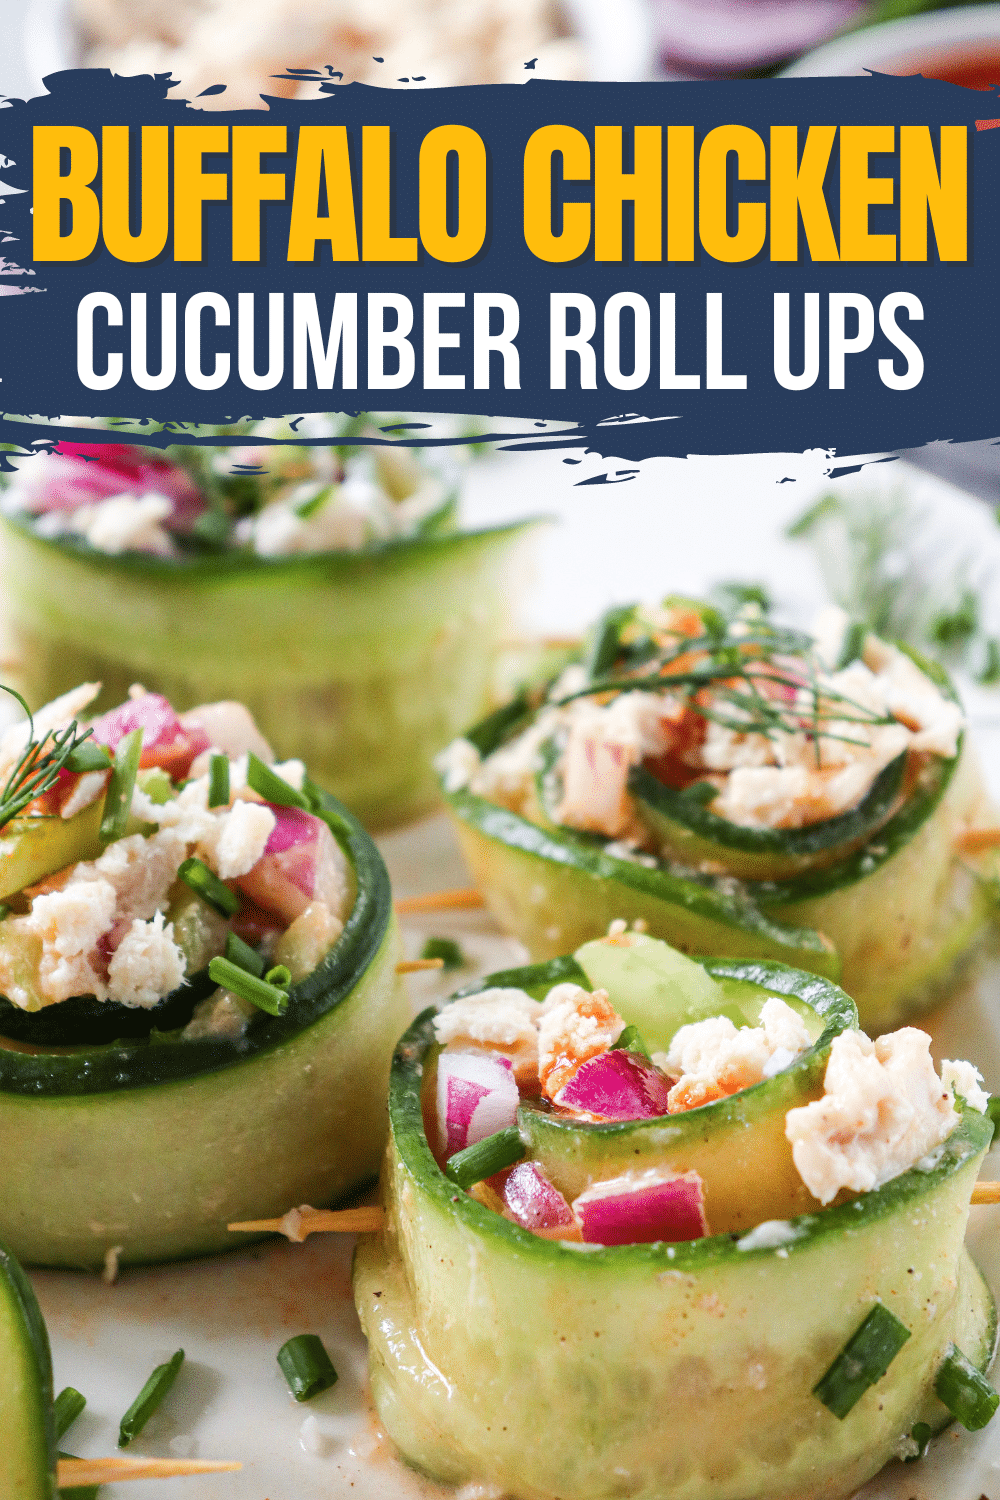 Delicious Buffalo Chicken Cucumber Roll served on a plate, featuring a blue banner with white and yellow lettering.